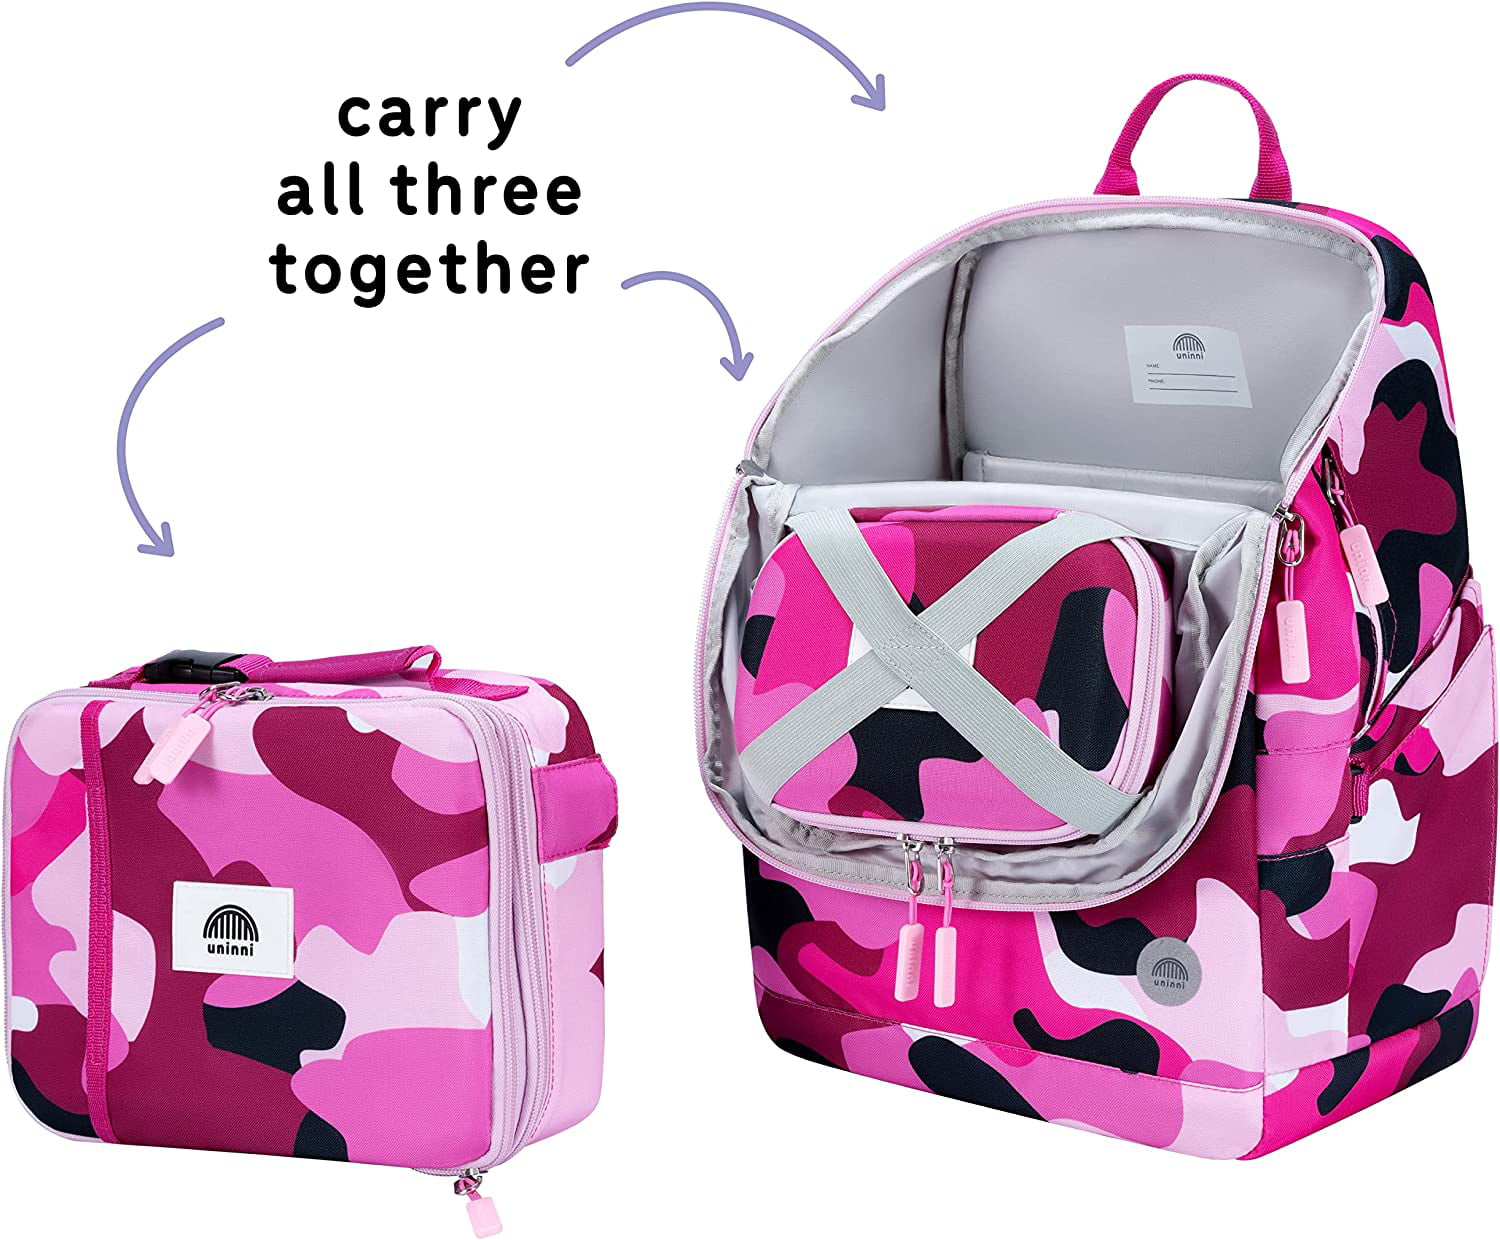  uninni 16 Kid's Backpack for Girls and Boys Age 6+ with  Padded, and Adjustable Shoulder Straps. Fits for Height 3'9 Above Kids  (Abstract Fuchsia)